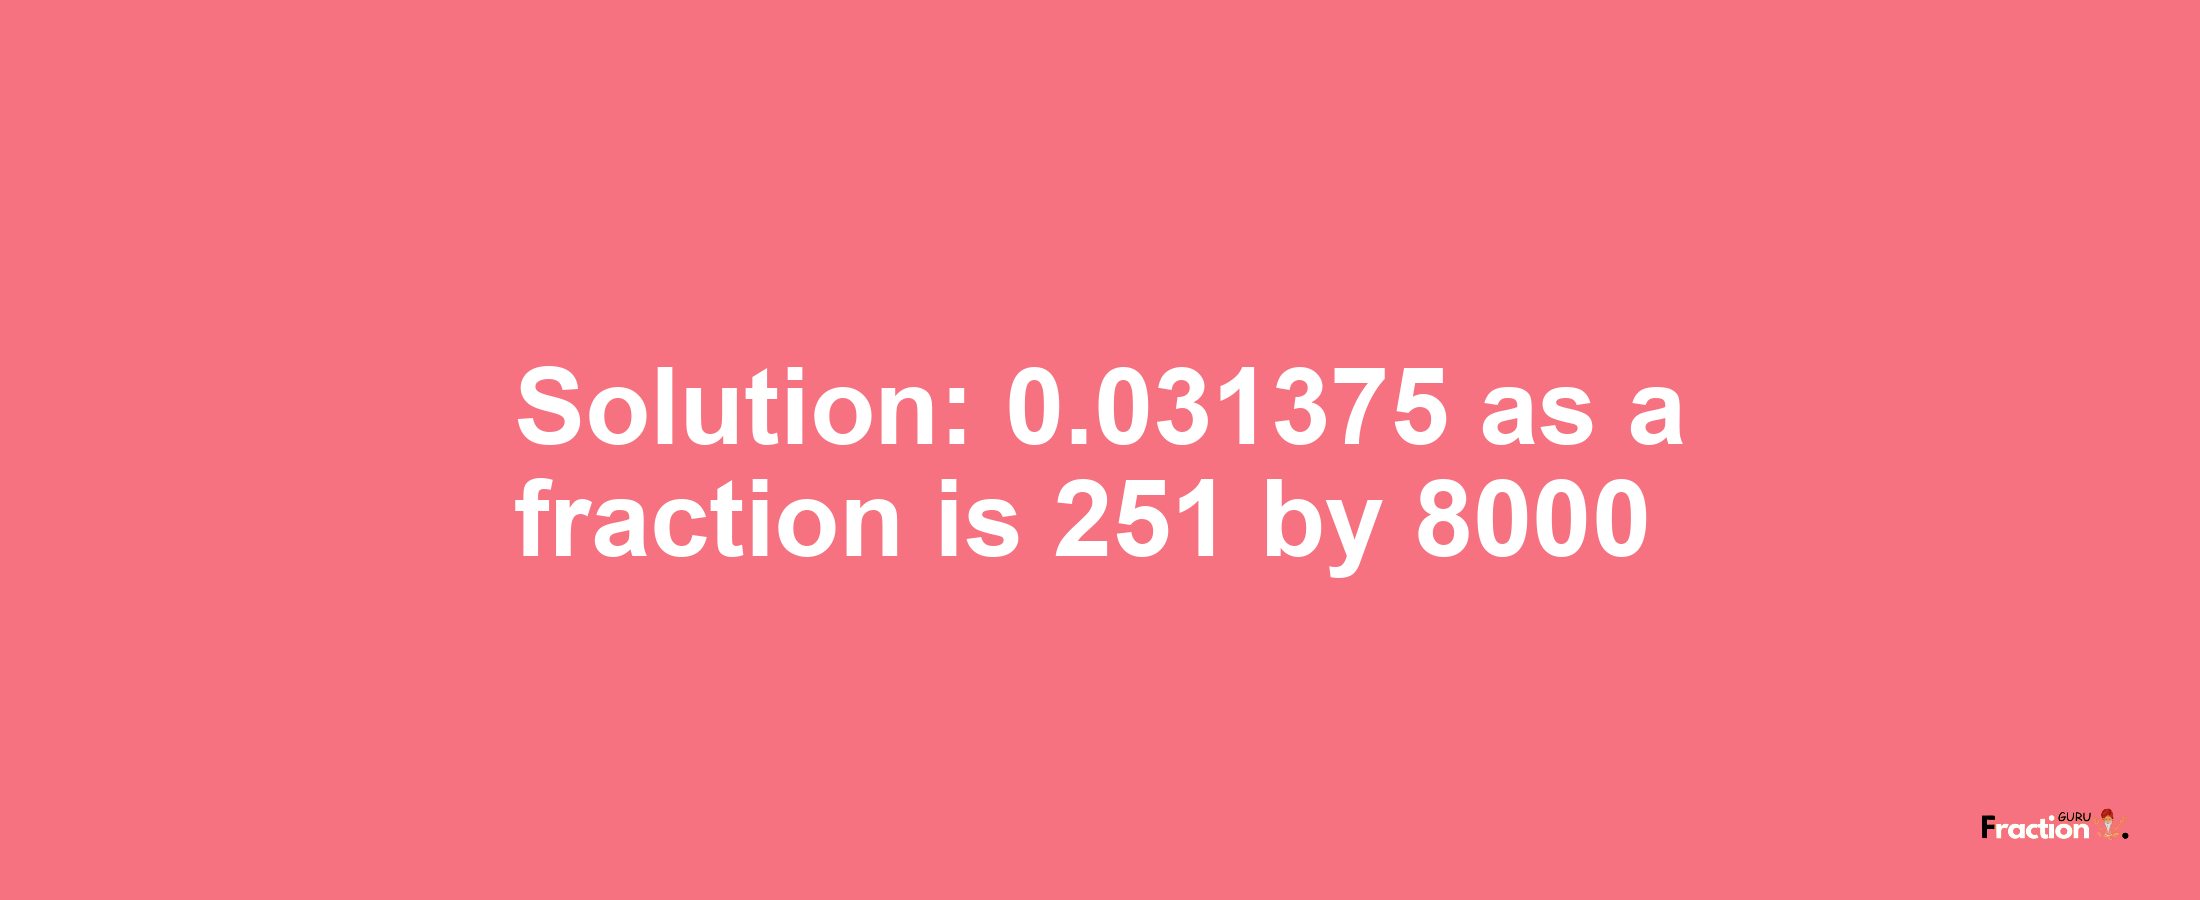 Solution:0.031375 as a fraction is 251/8000